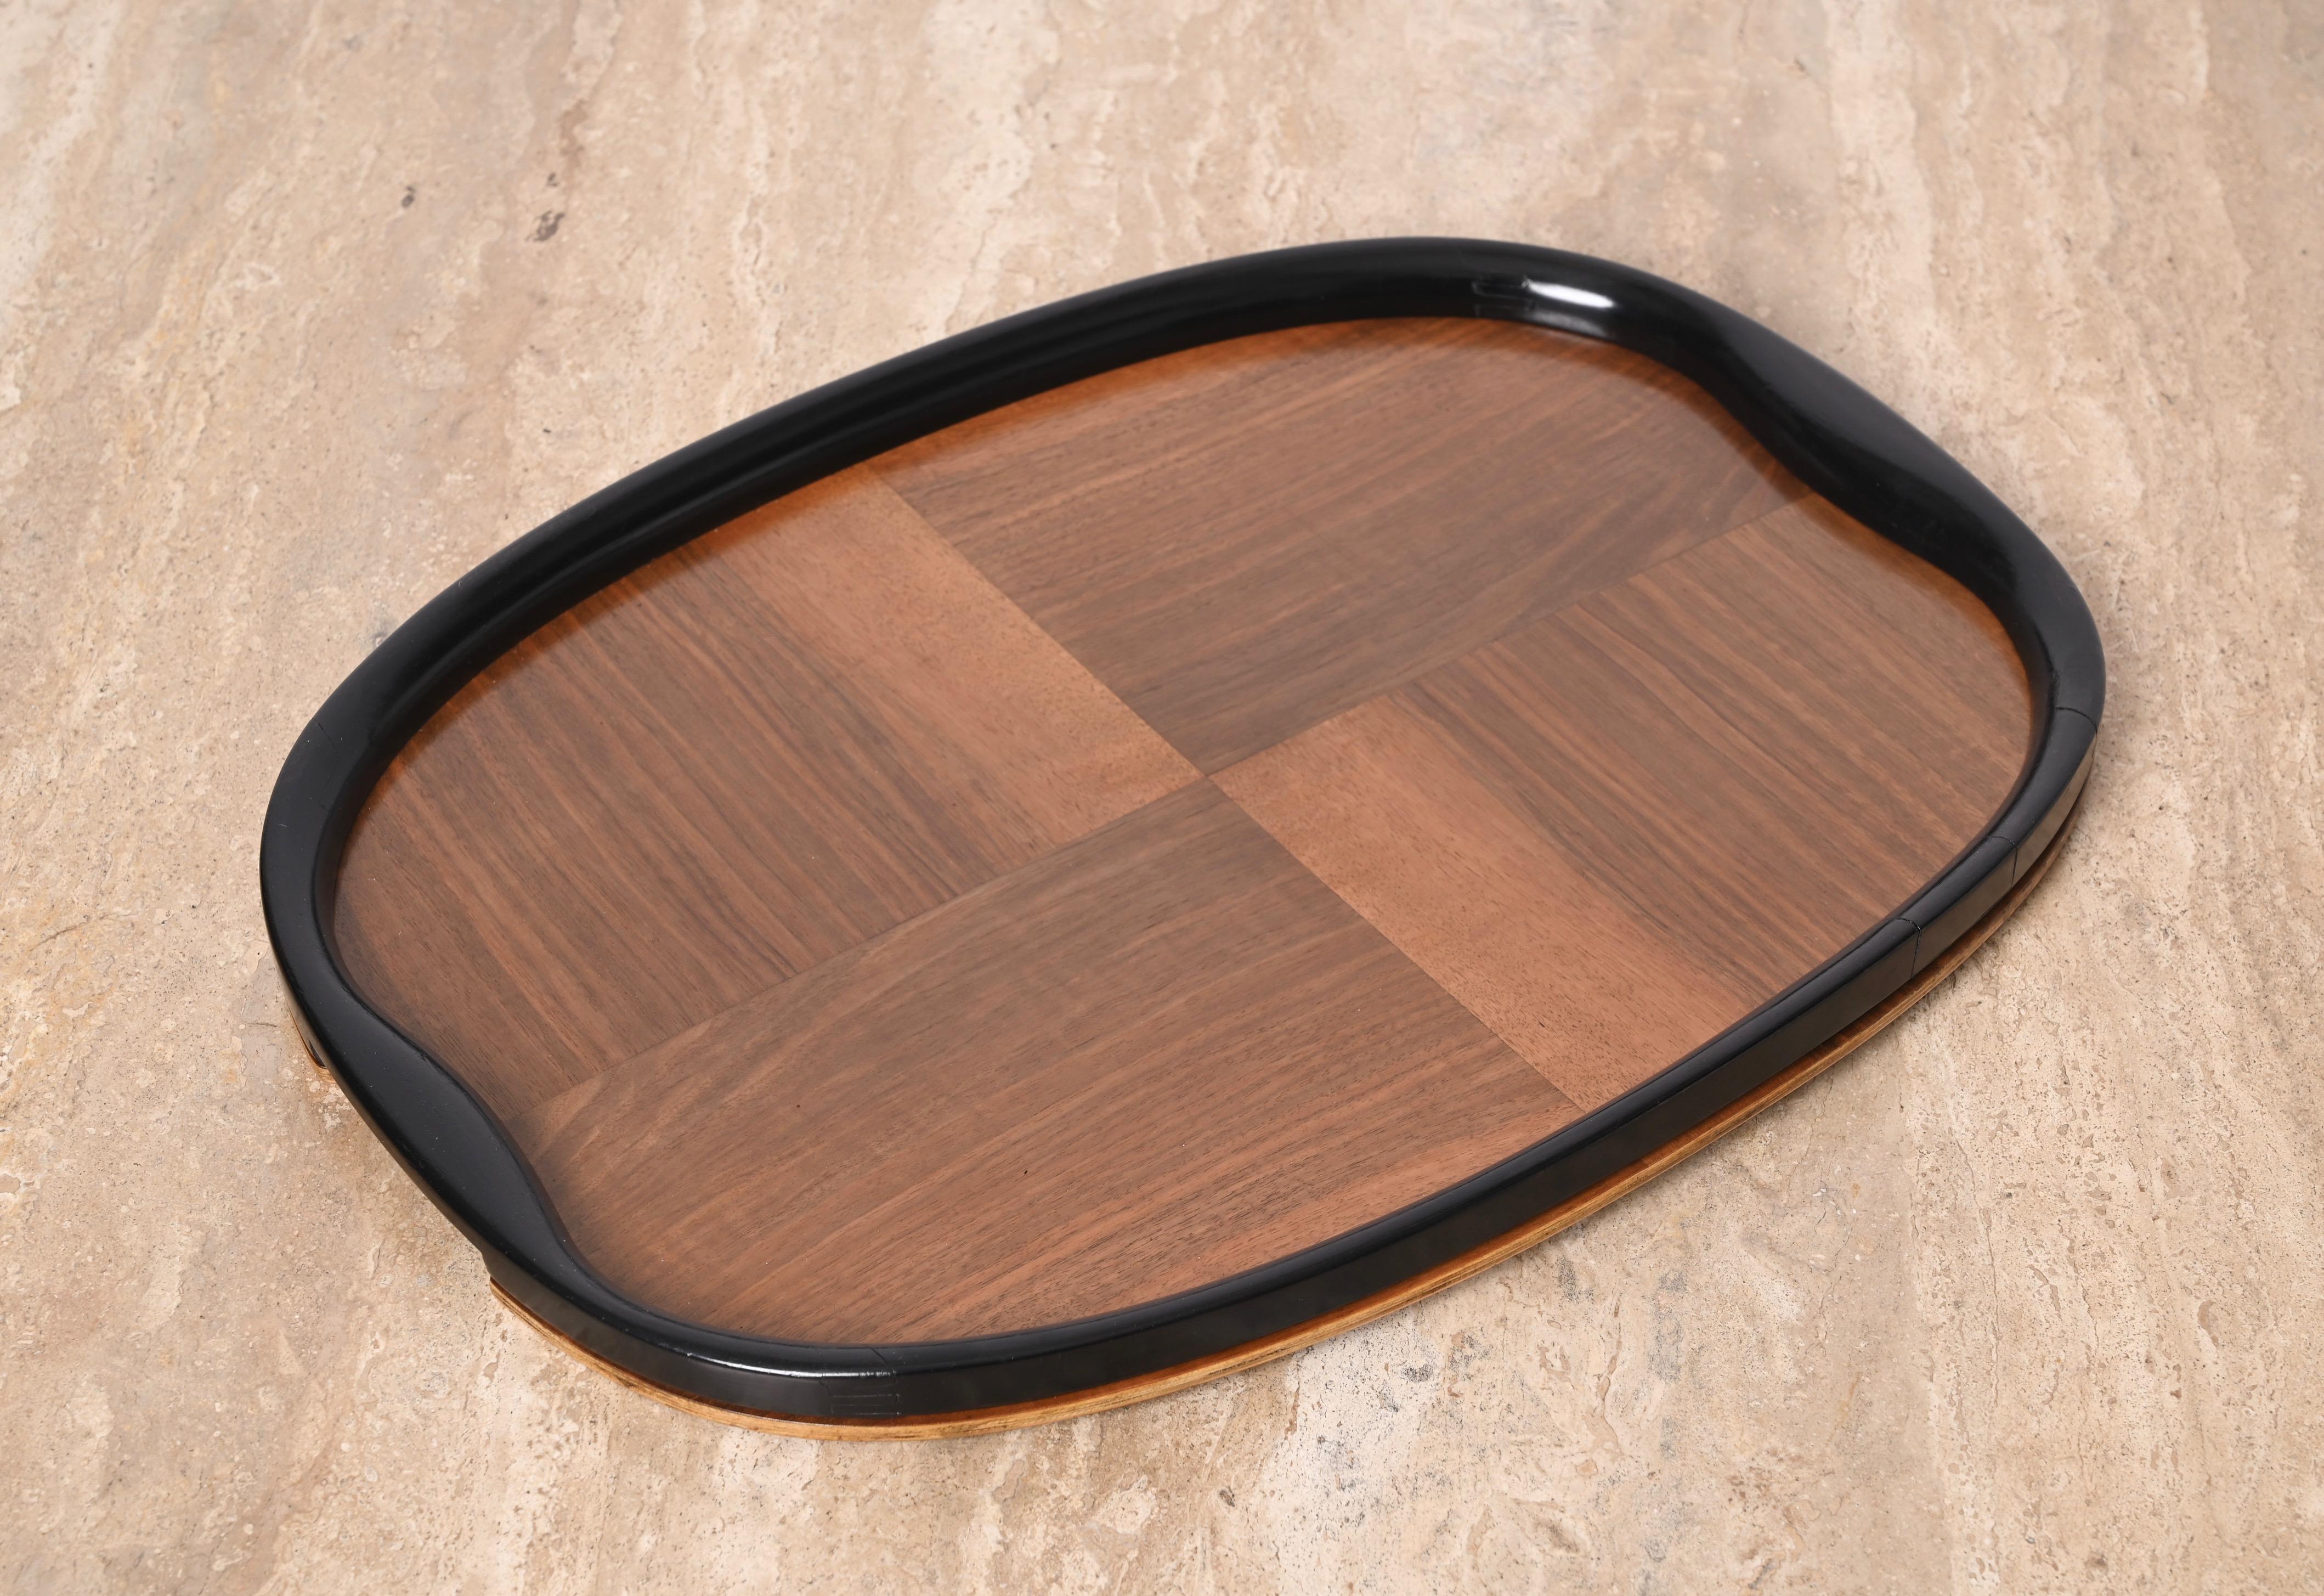 Pair of Art Deco Serving Trays, Ebonized Wood and Walnut, Italy, 1940s For Sale 1